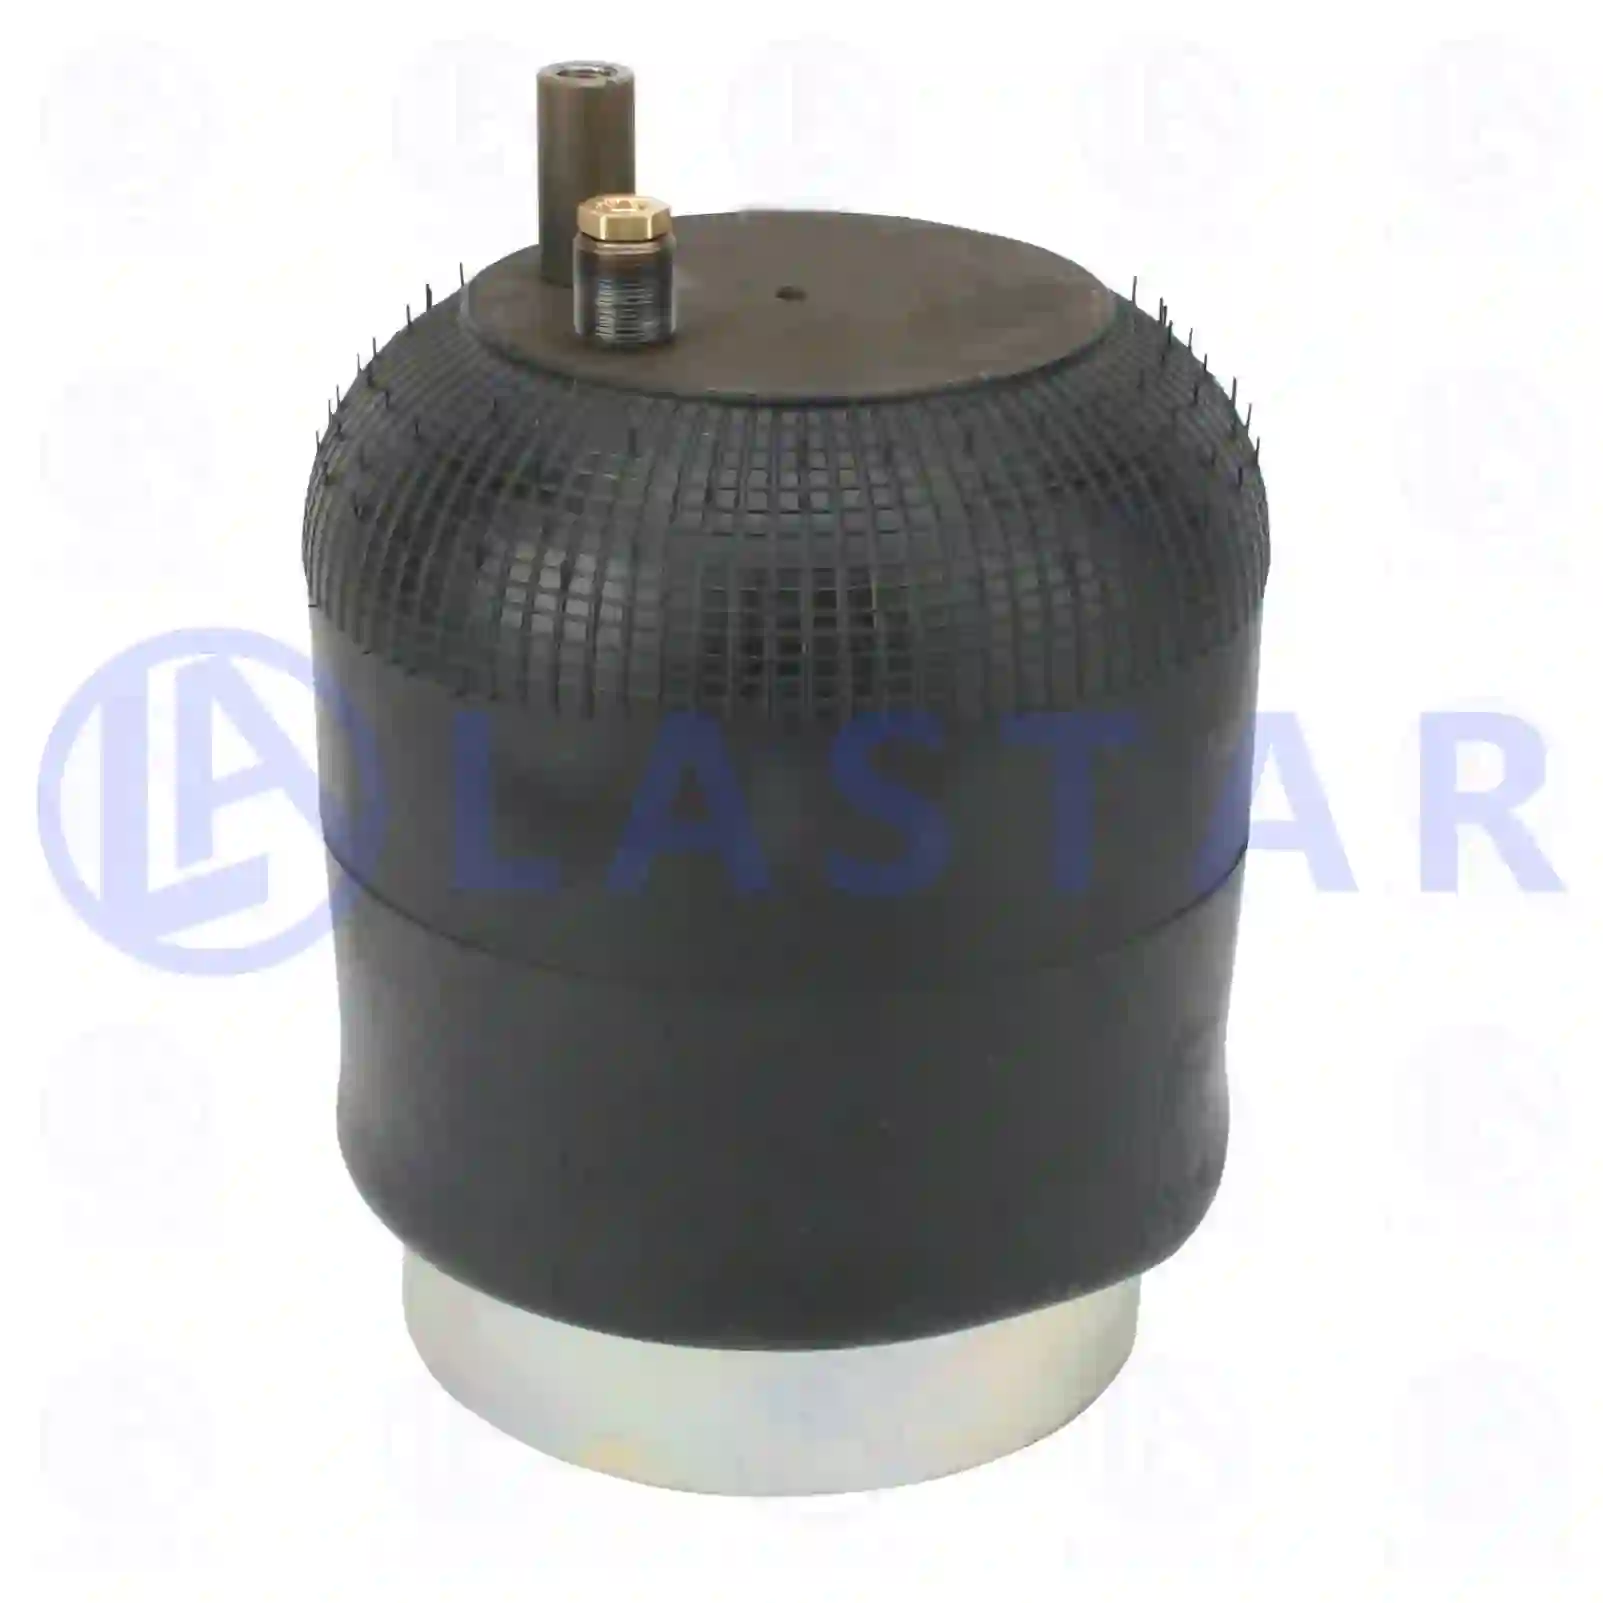 Air spring, with steel piston, 77727752, 9423200721, 94232 ||  77727752 Lastar Spare Part | Truck Spare Parts, Auotomotive Spare Parts Air spring, with steel piston, 77727752, 9423200721, 94232 ||  77727752 Lastar Spare Part | Truck Spare Parts, Auotomotive Spare Parts